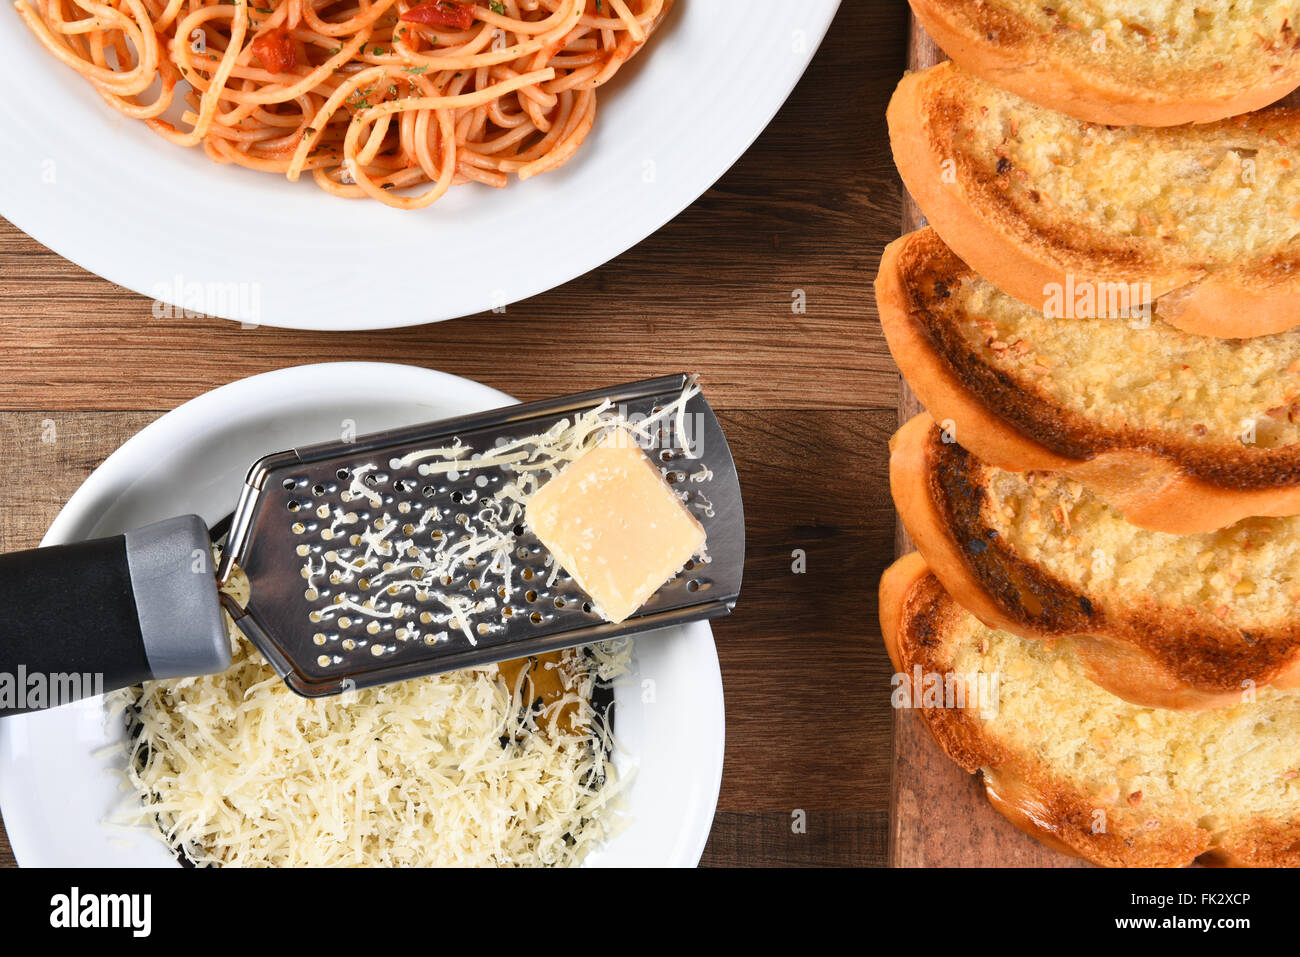 Overhead view of garlic bread on a cutting board and a plate of spaghetti with a cheese grater with grated parmesan cheese. Stock Photo